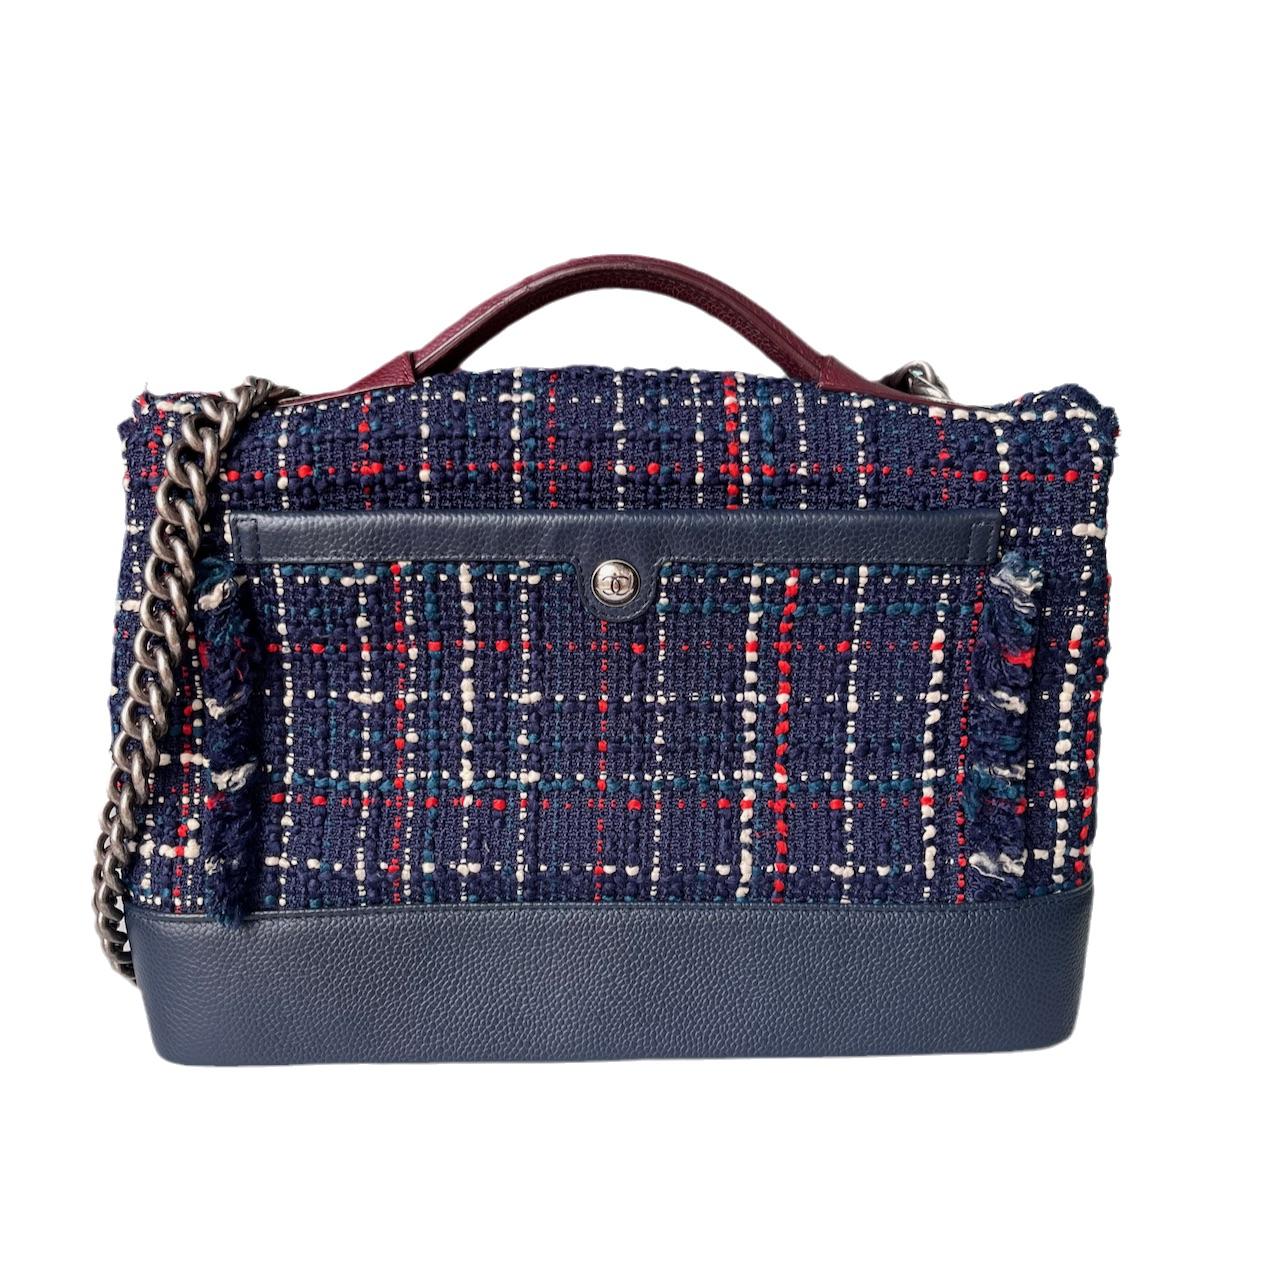 The Chanel Blue and Red Tweed and Caviar Airline Flap Bag Silver Hardware 2016 is a classic and stylish statement piece. With tweed and grained calfskin leather, the bag is lined with tonal fabric and features antiqued silver hardware. It has added